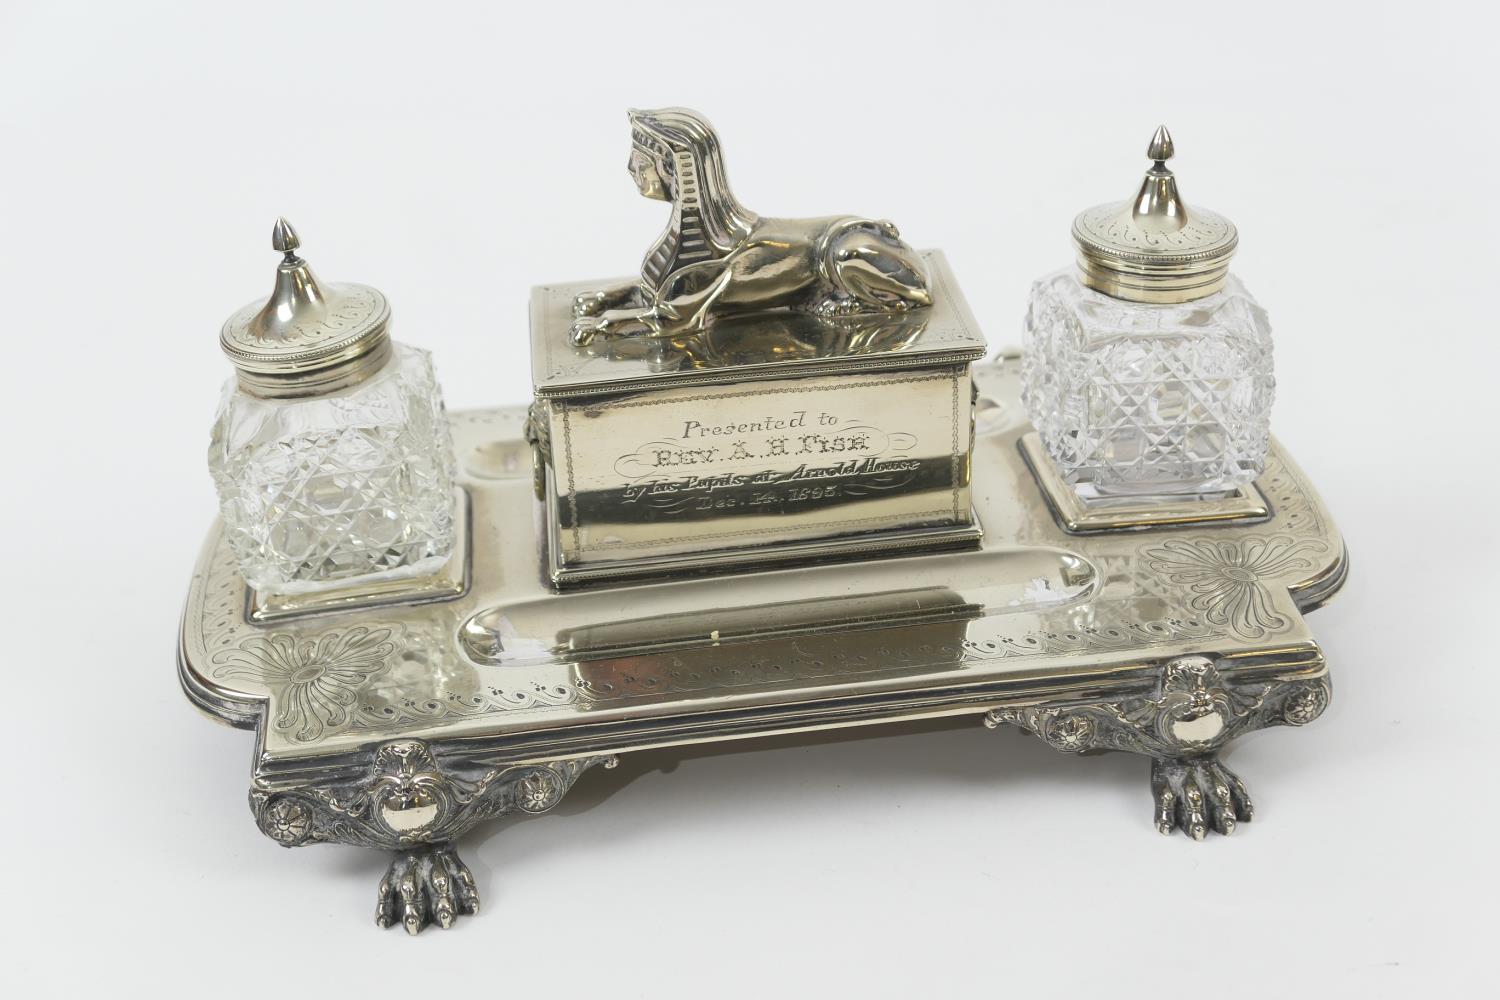 Late Victorian silver plated presentation inkstand, circa 1895, shaped rectangular stand